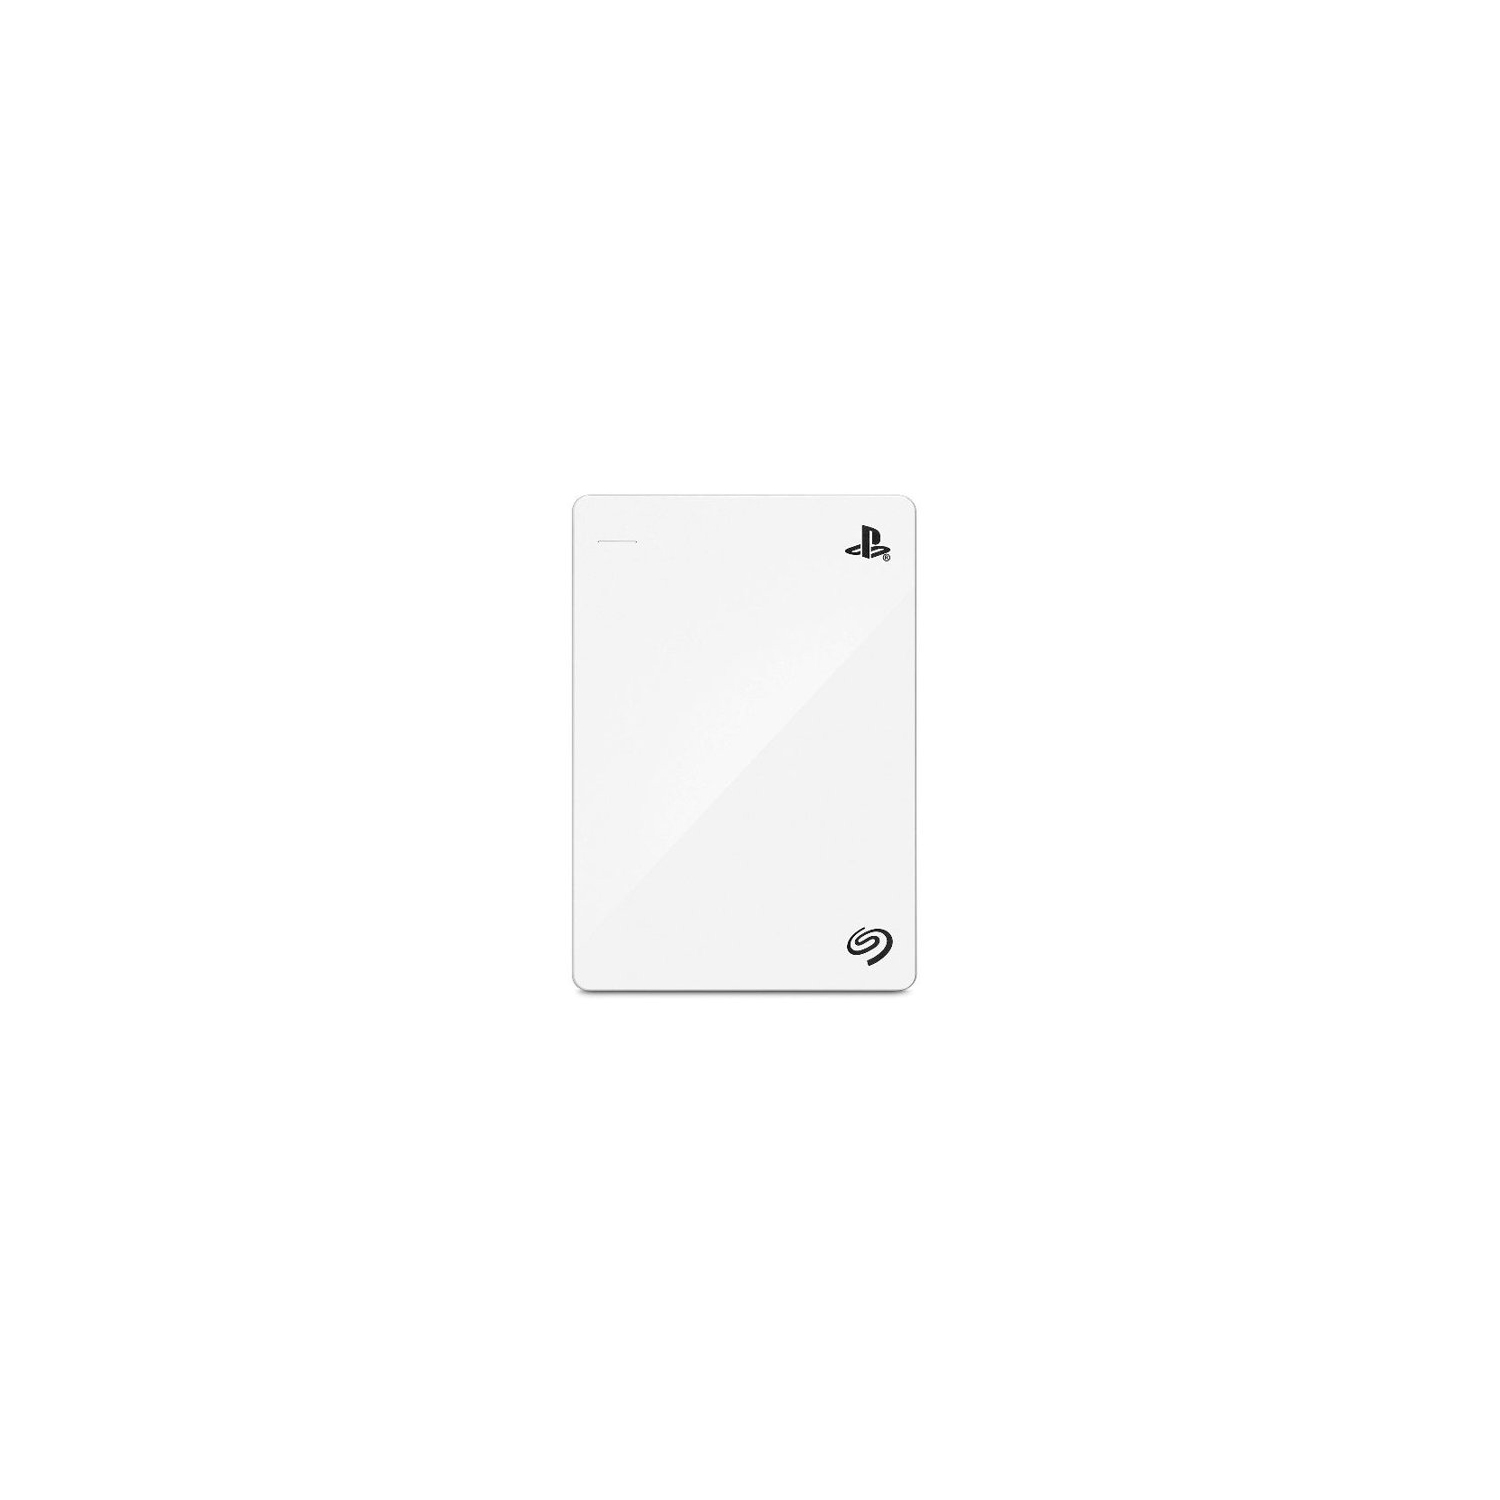 Refurbished (Good) - Seagate 2TB Game Drive White External Hard Drive for PS4 Systems, STGD2000102, Certified Refurbished